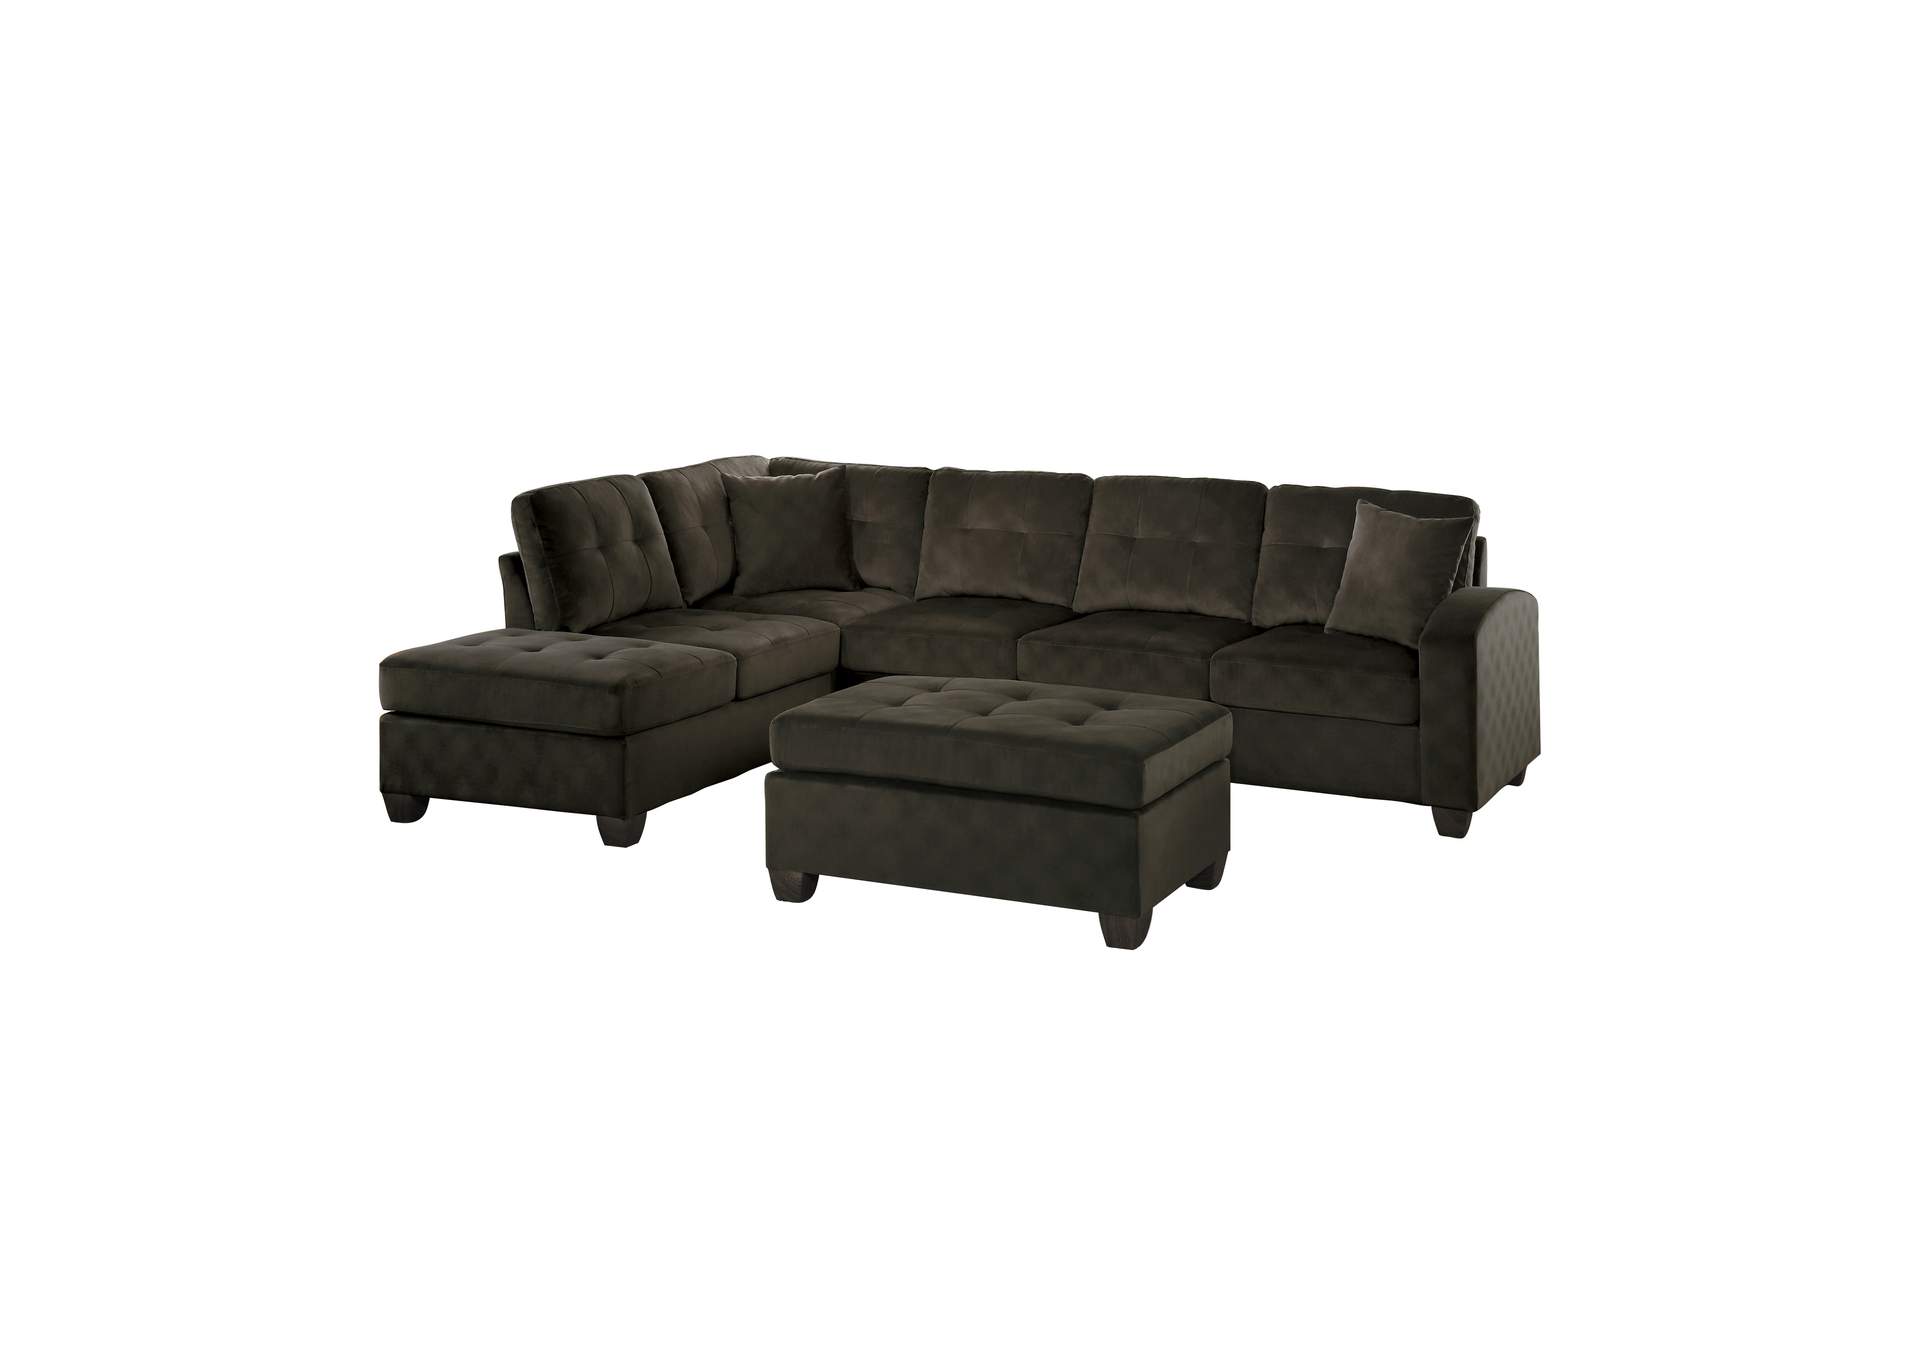 Chocolate 3-Piece Reversible Sectional with Ottoman,Homelegance